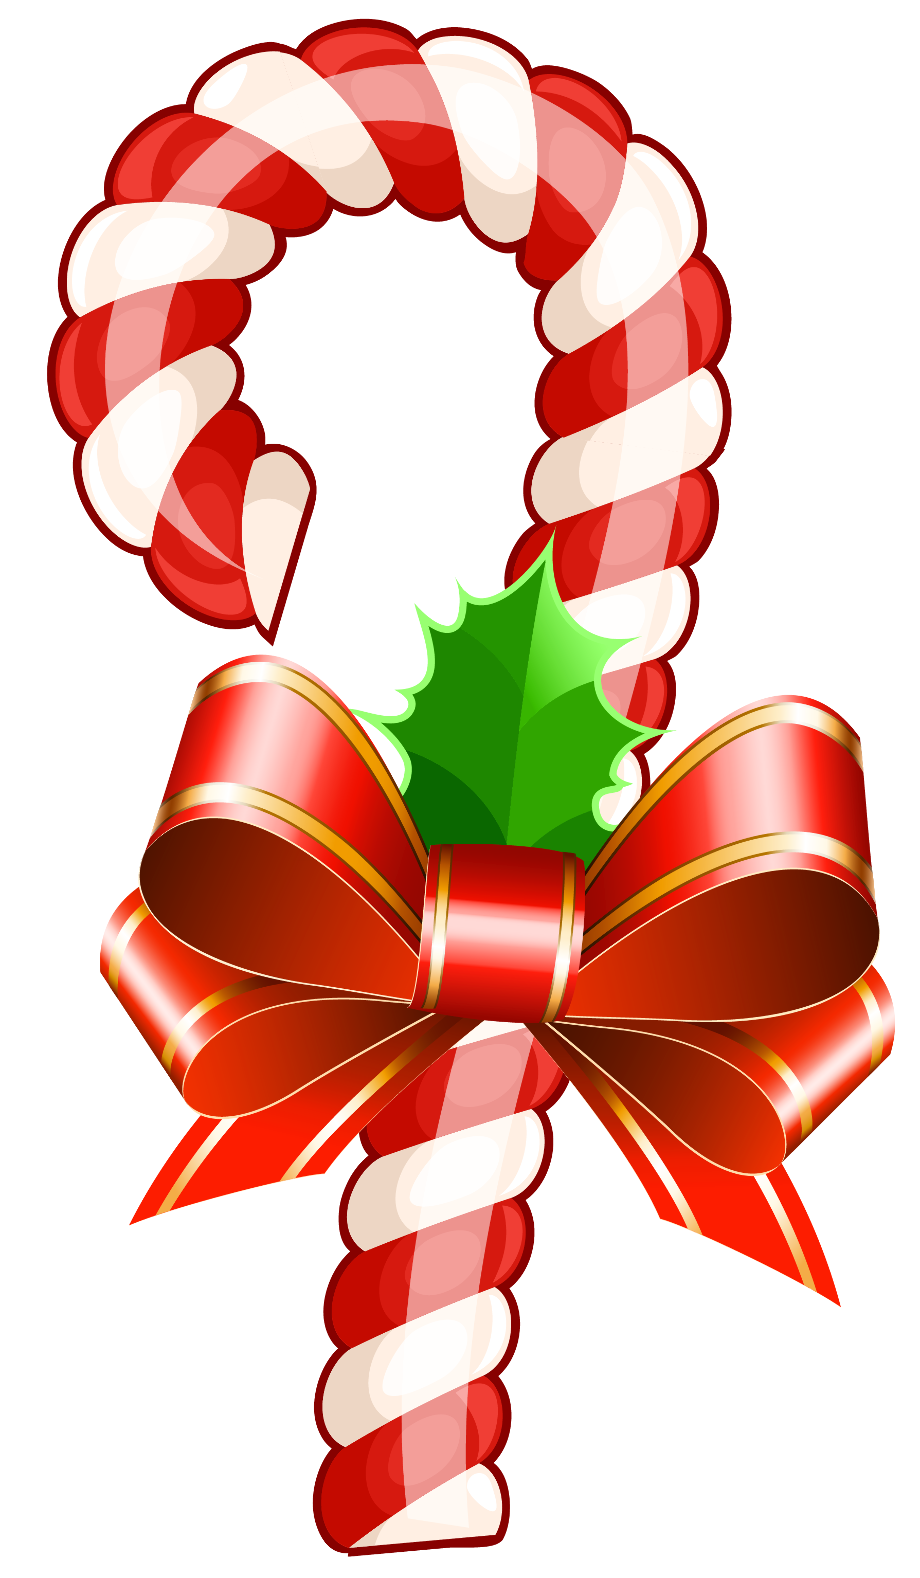 candy cane clipart vector